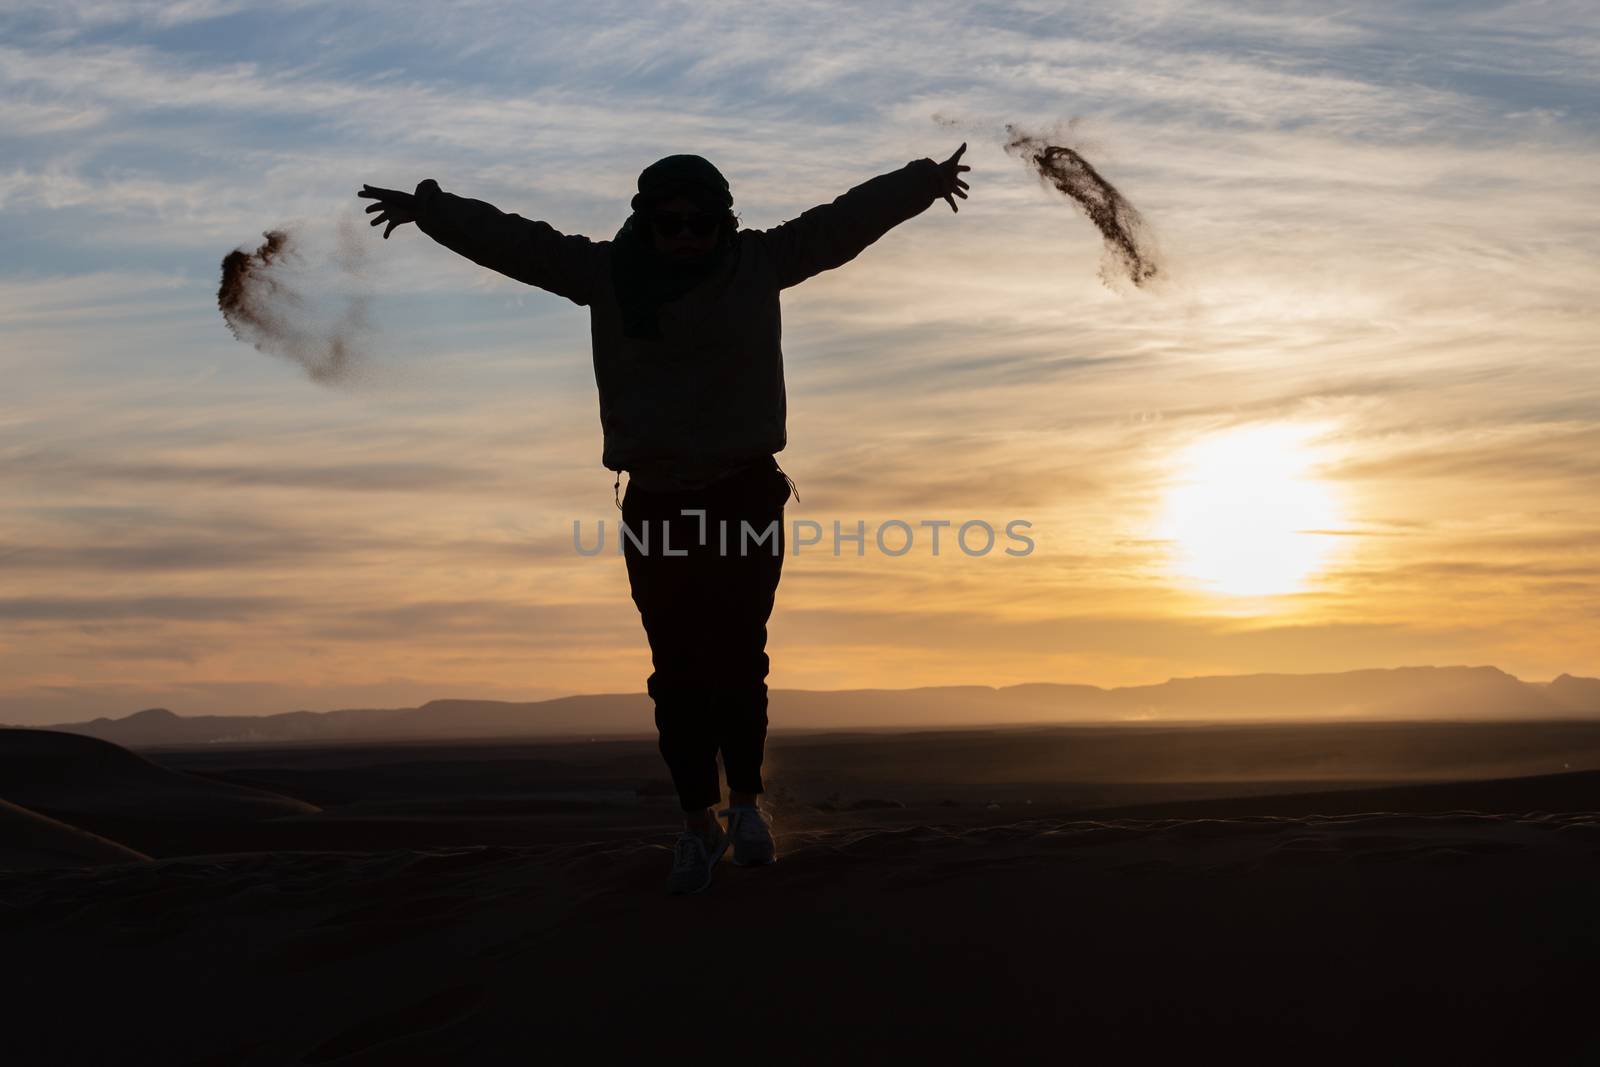 Silhouette of person jumping and throwing sand in the Sahara against a sunset by kgboxford